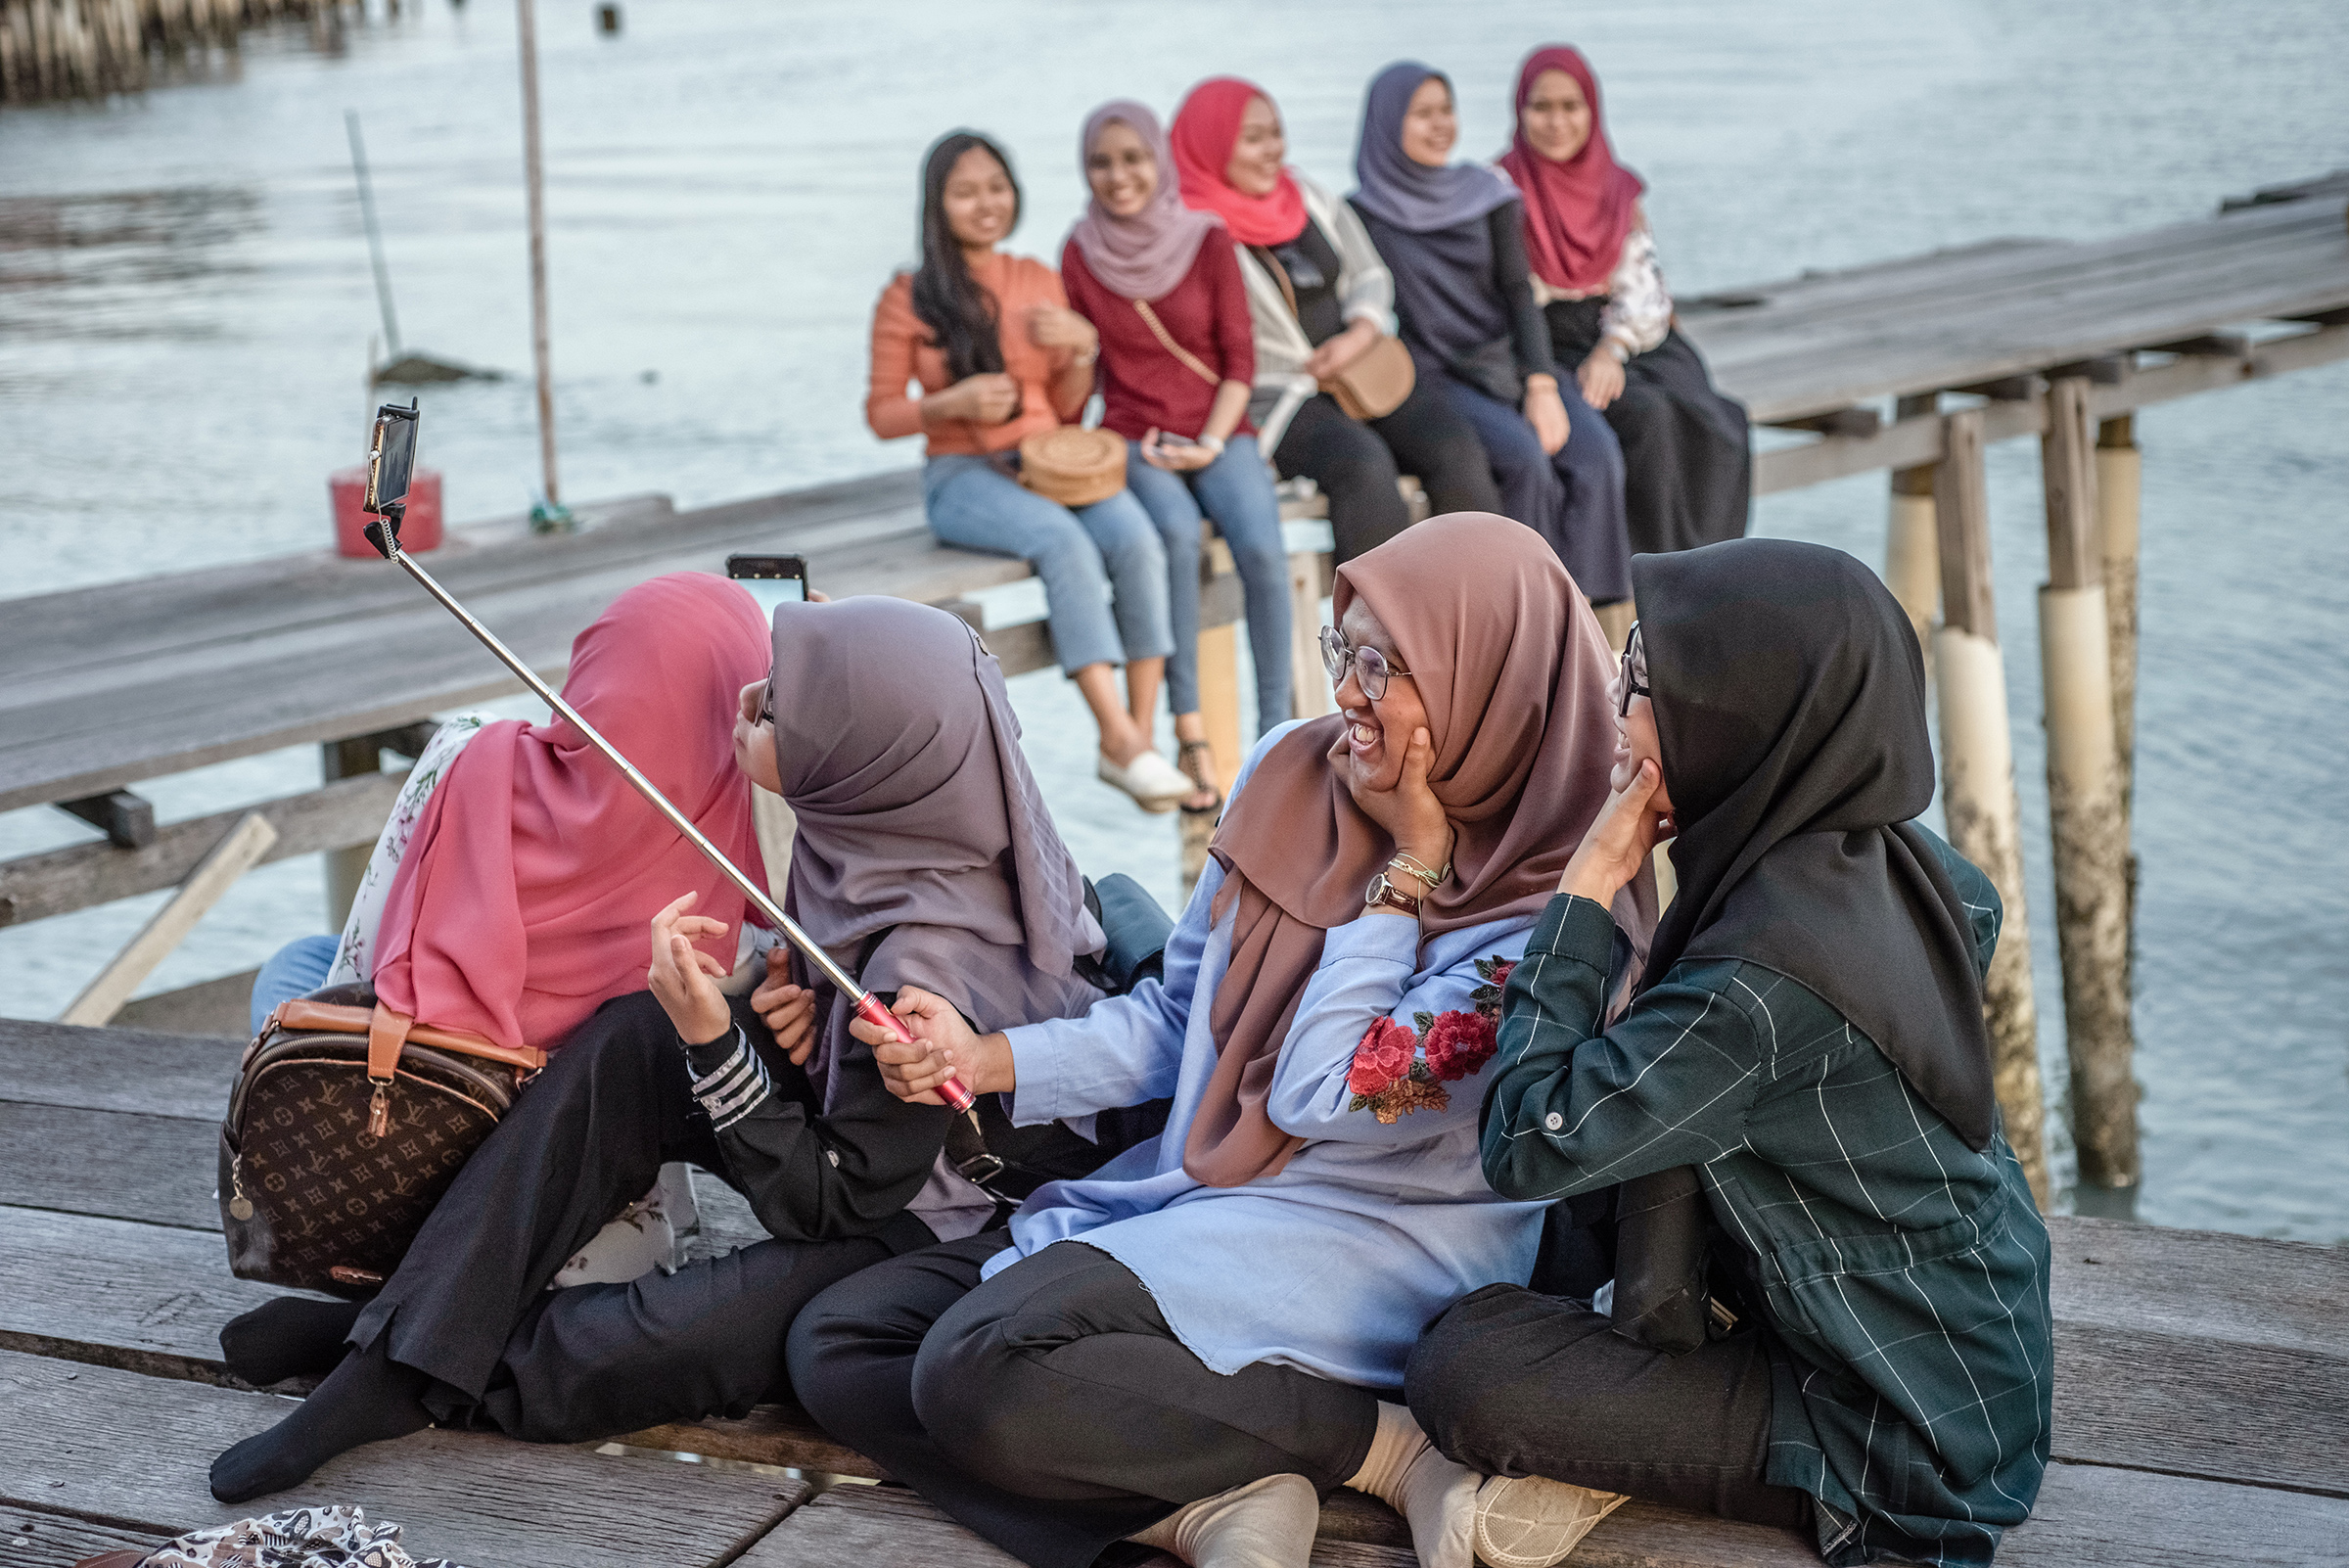 Muslim women enjoy the sunset in one of the Clan Jetties villages, in George Town, Penang Island, Malaysia, in January 2019. (Oleksandr Rupeta—NurPhoto via Getty Images)